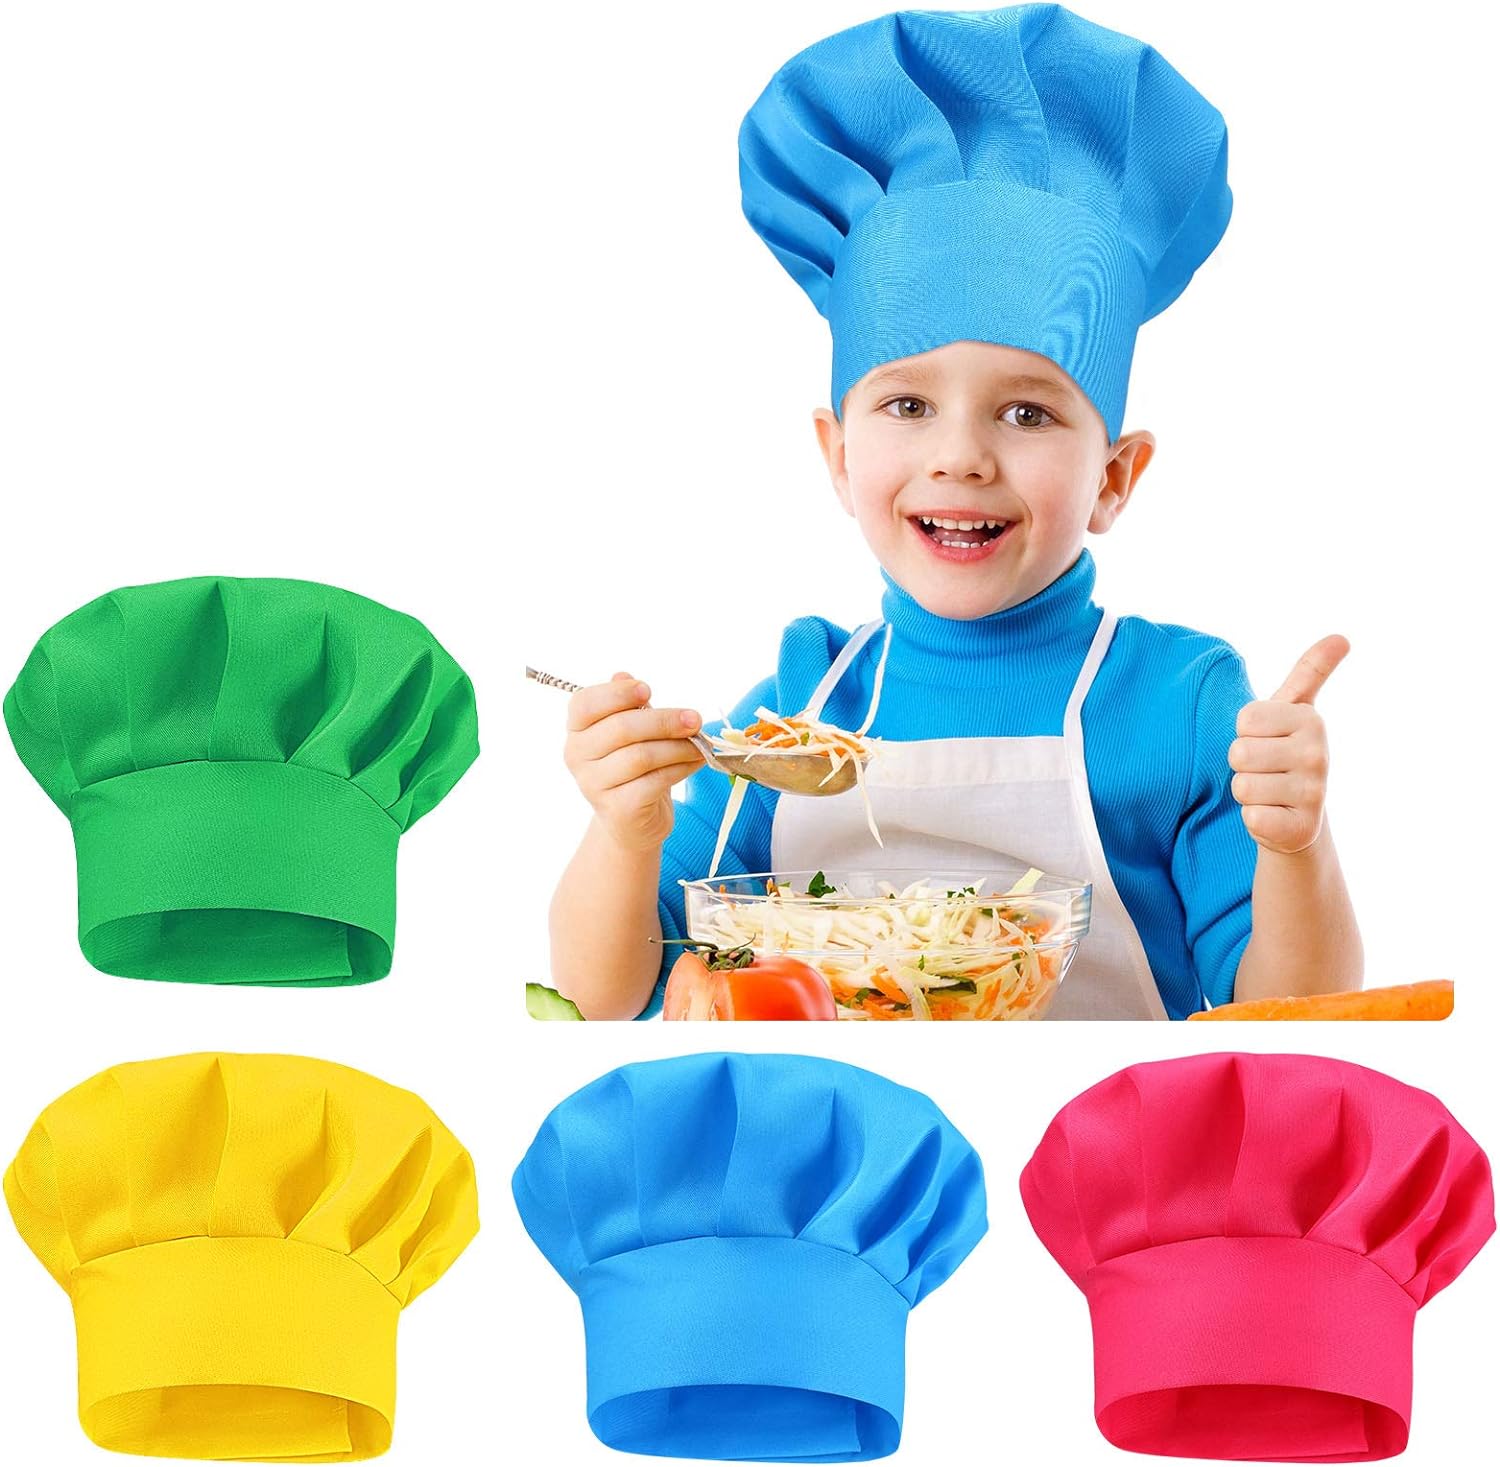 Syhood 4 Colors Adjustable Chef Hat for Kids Adjustable Chef Toques Kitchen  Chef Caps for Cooking Baking Painting Art Catering Home Ki